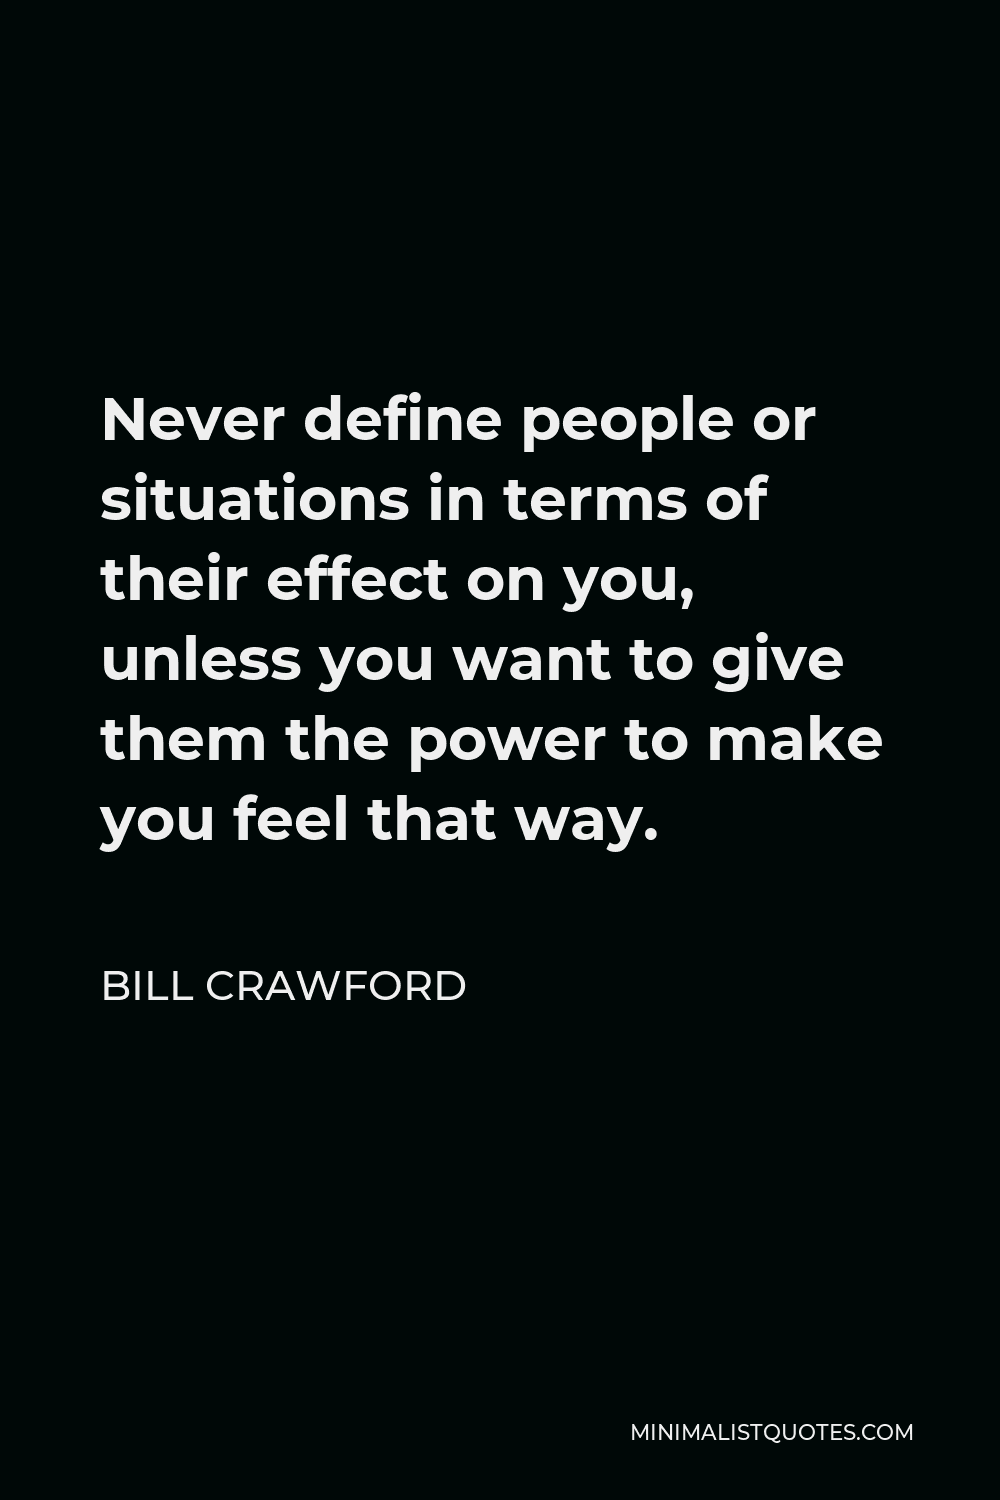 Bill Crawford Quote - Never define people or situations in terms of their effect on you, unless you want to give them the power to make you feel that way.